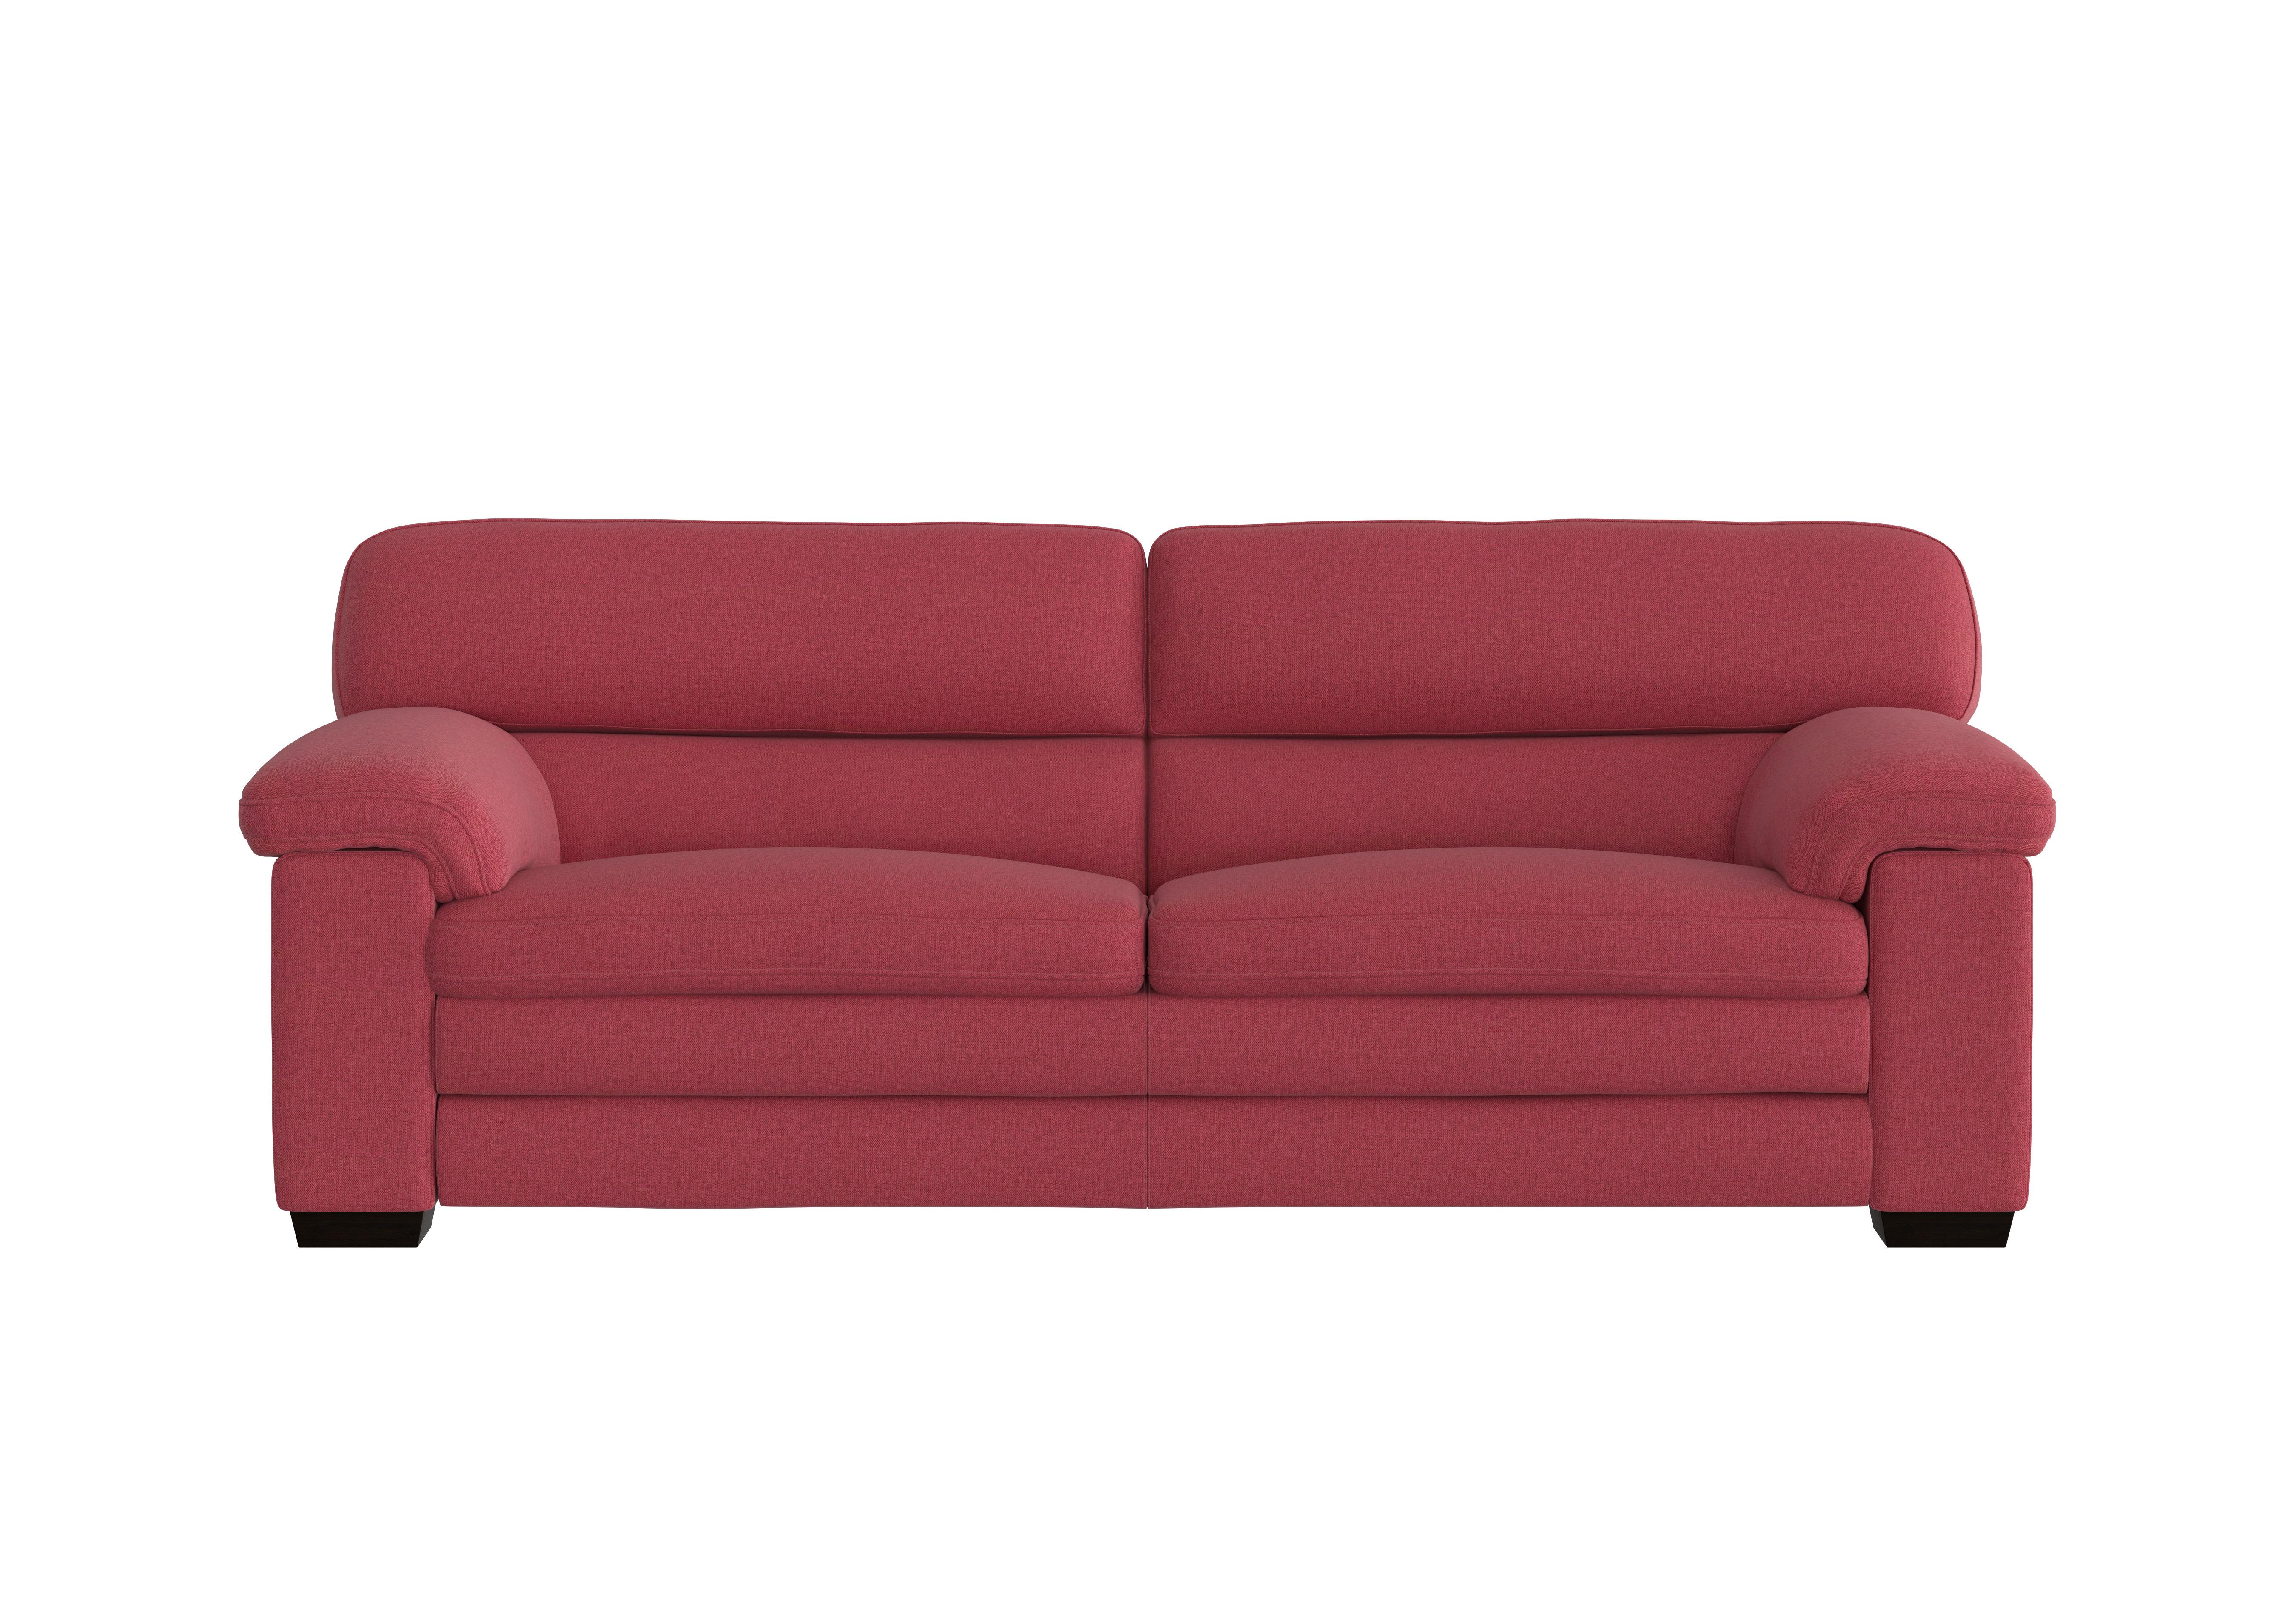 Cozee Fabric 3 Seater Sofa in Fab-Blt-R29 Red on Furniture Village